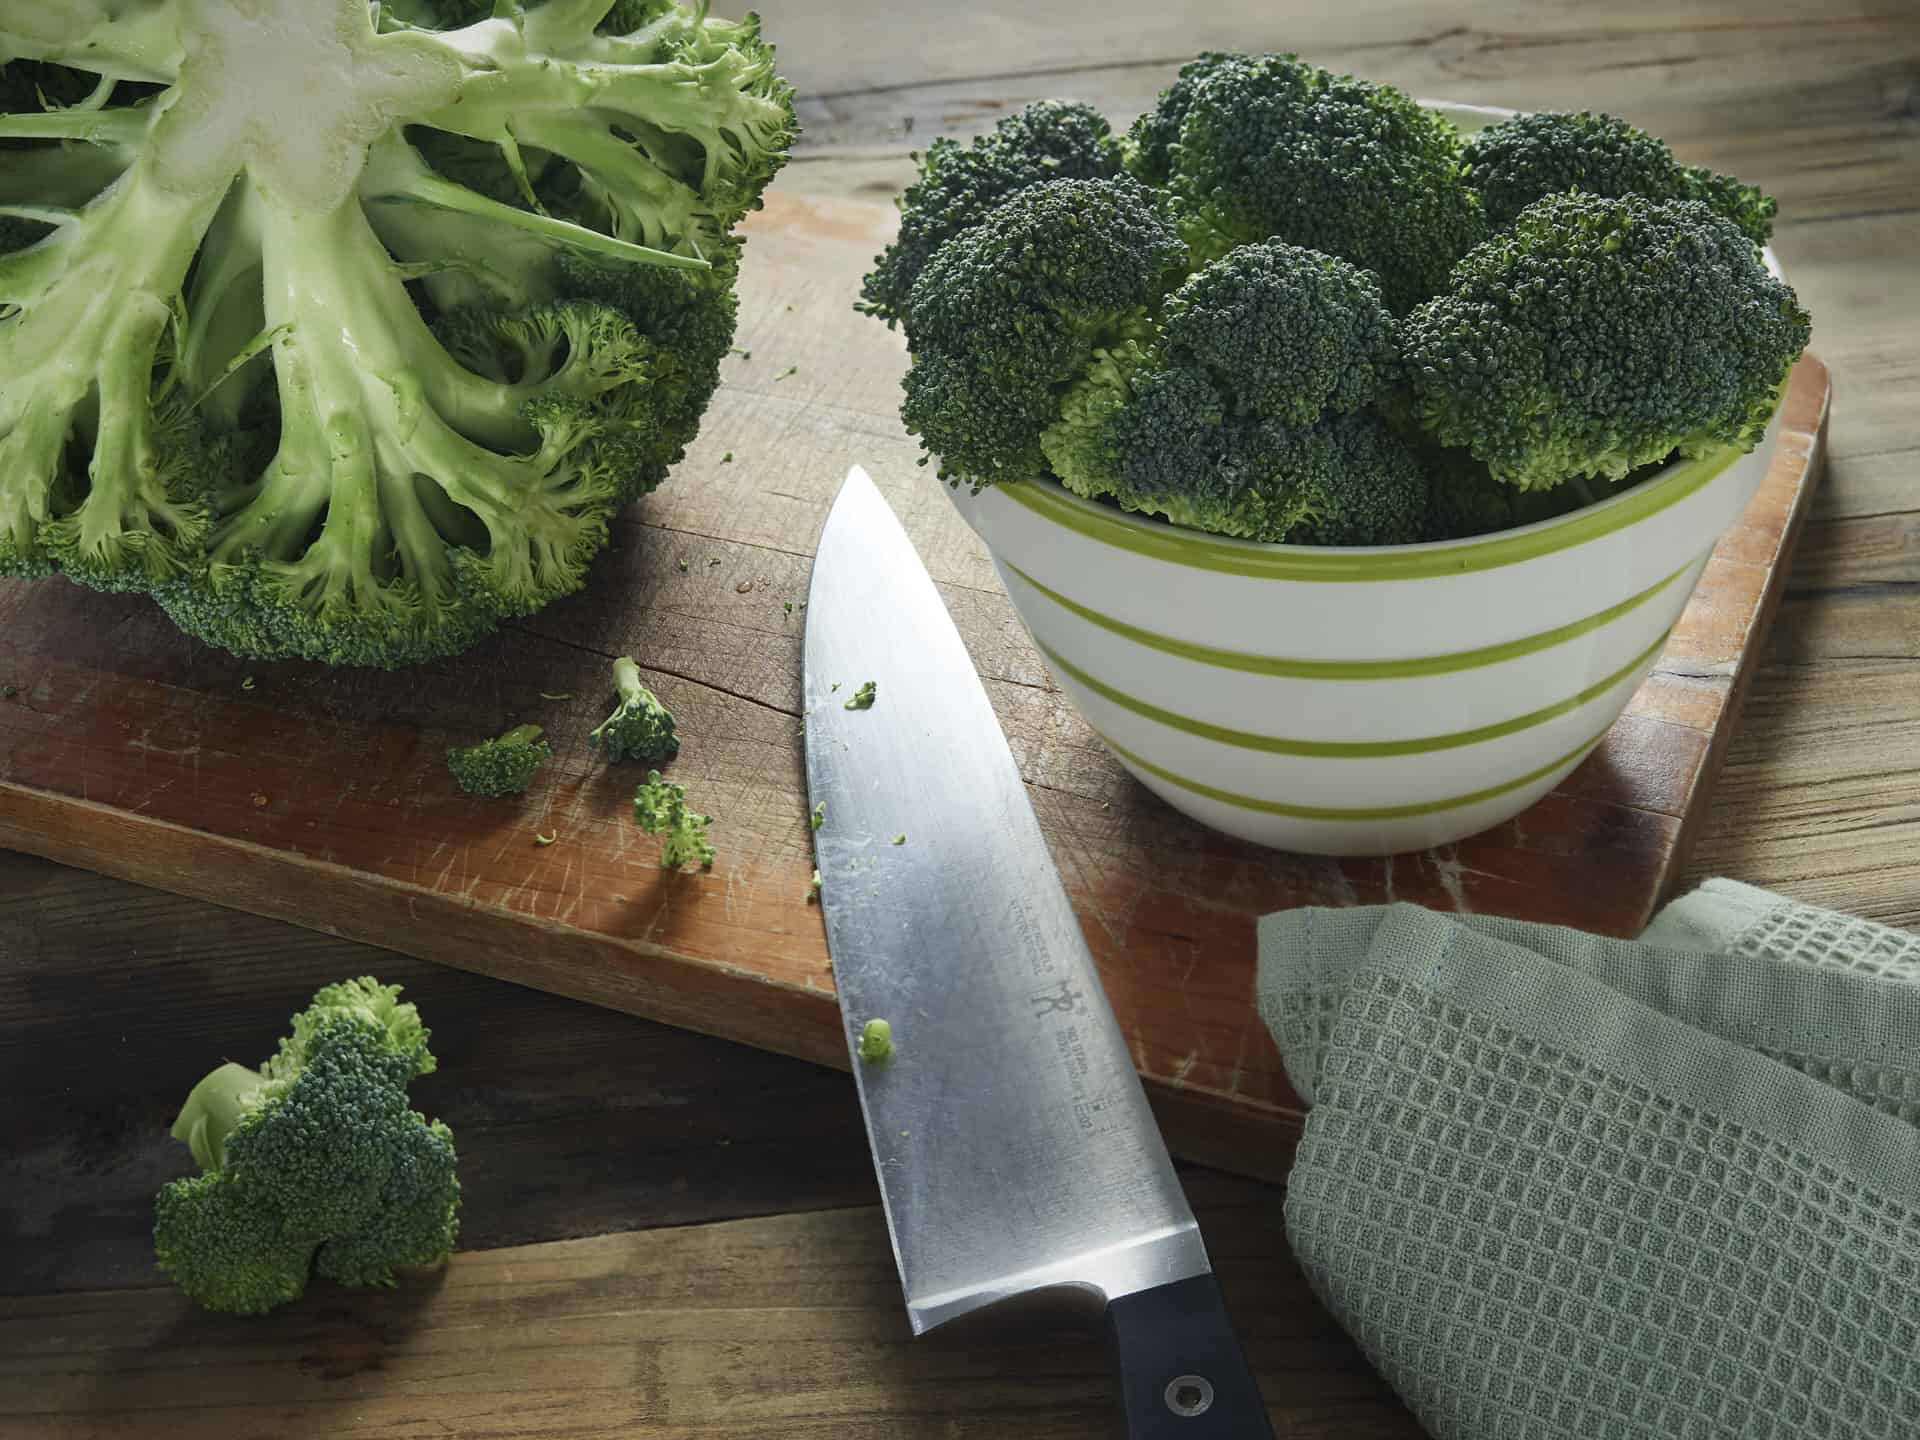 Broccoli head with florets on cutting board with knife